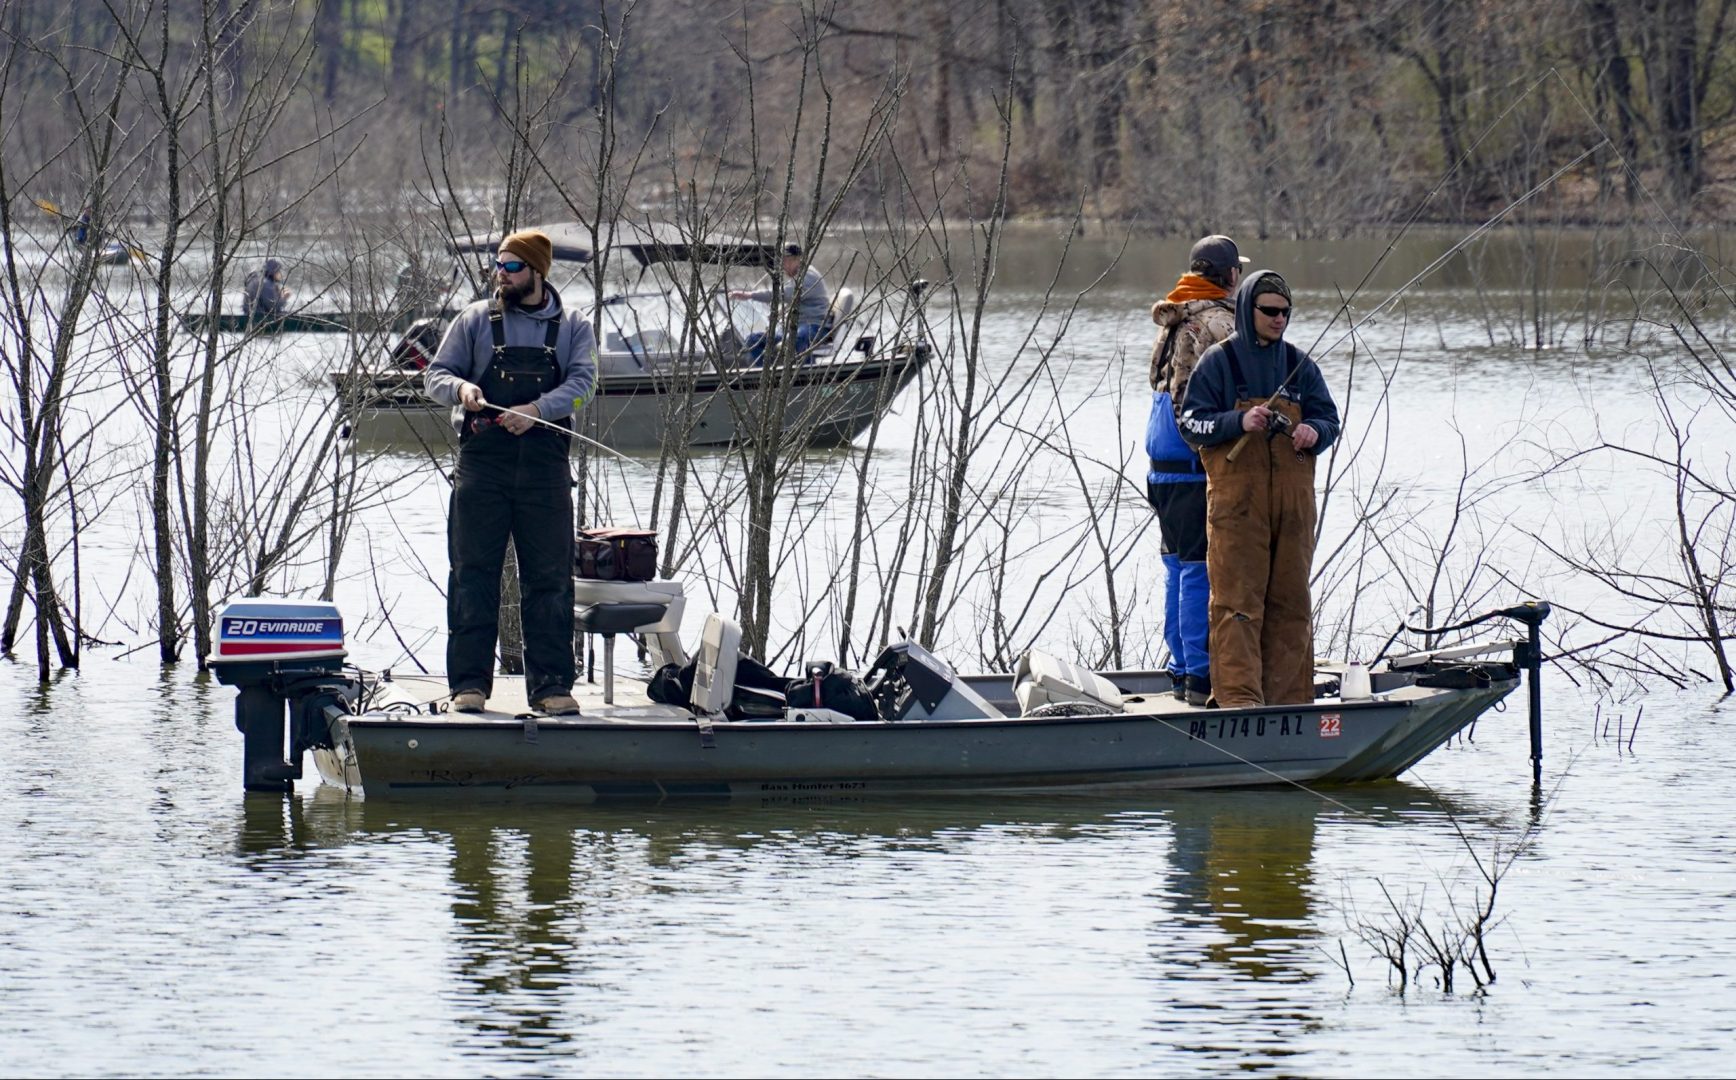 Anglers fish from boats at Glade Run Lake Conservancy, on opening day of trout fishing season in Pennsylvania, Saturday, April 3, 2021, in Valencia, Pa. 